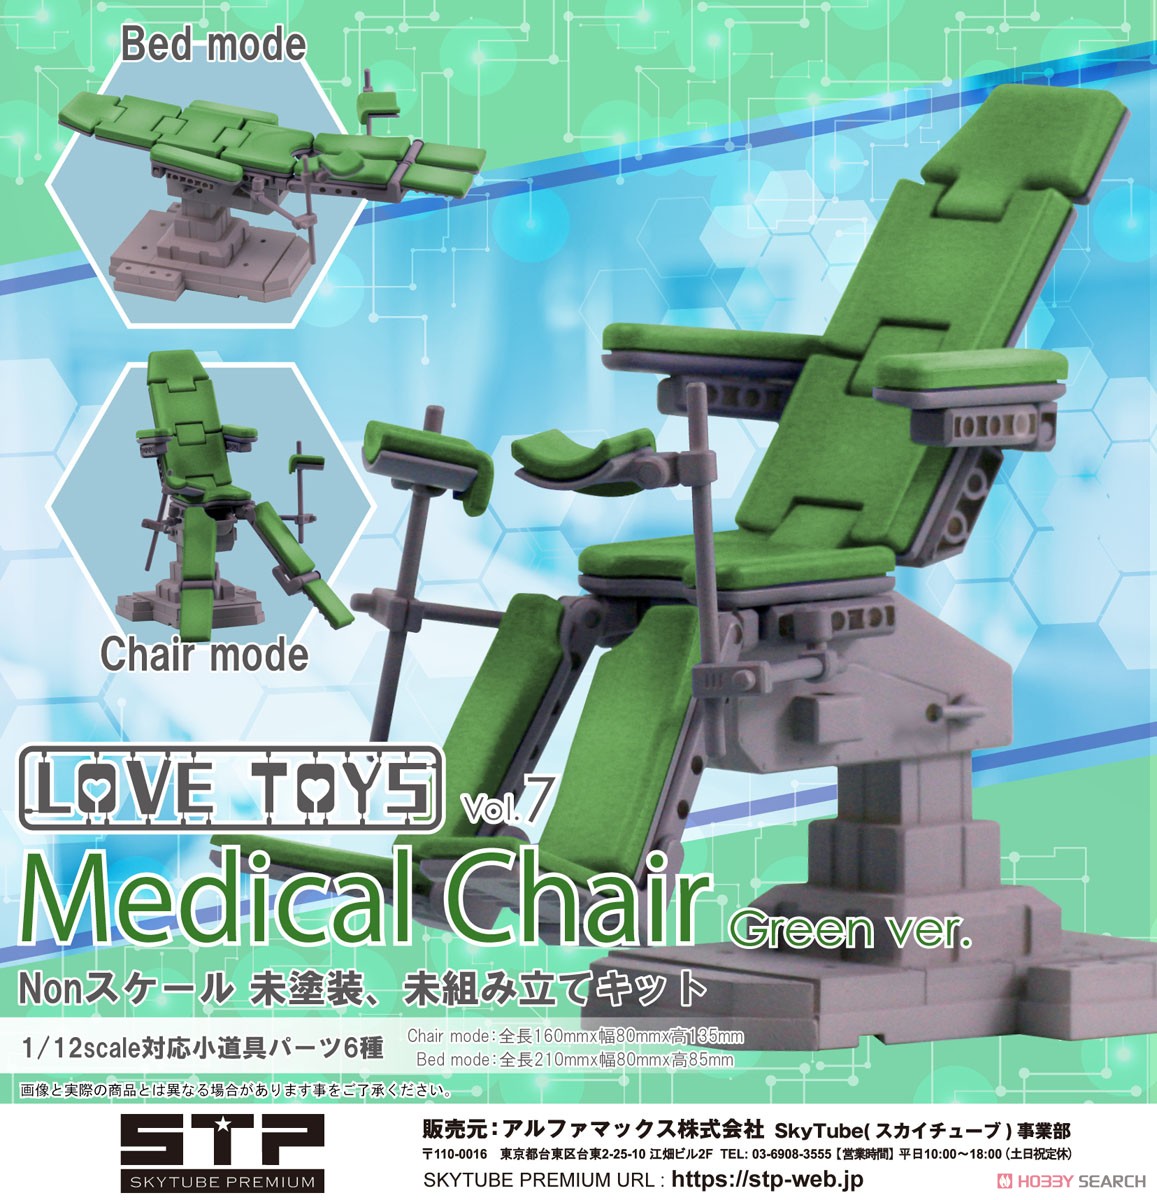 LOVE TOYS Vol.7 Medical Chair Green ver. (組立キット) 商品画像6